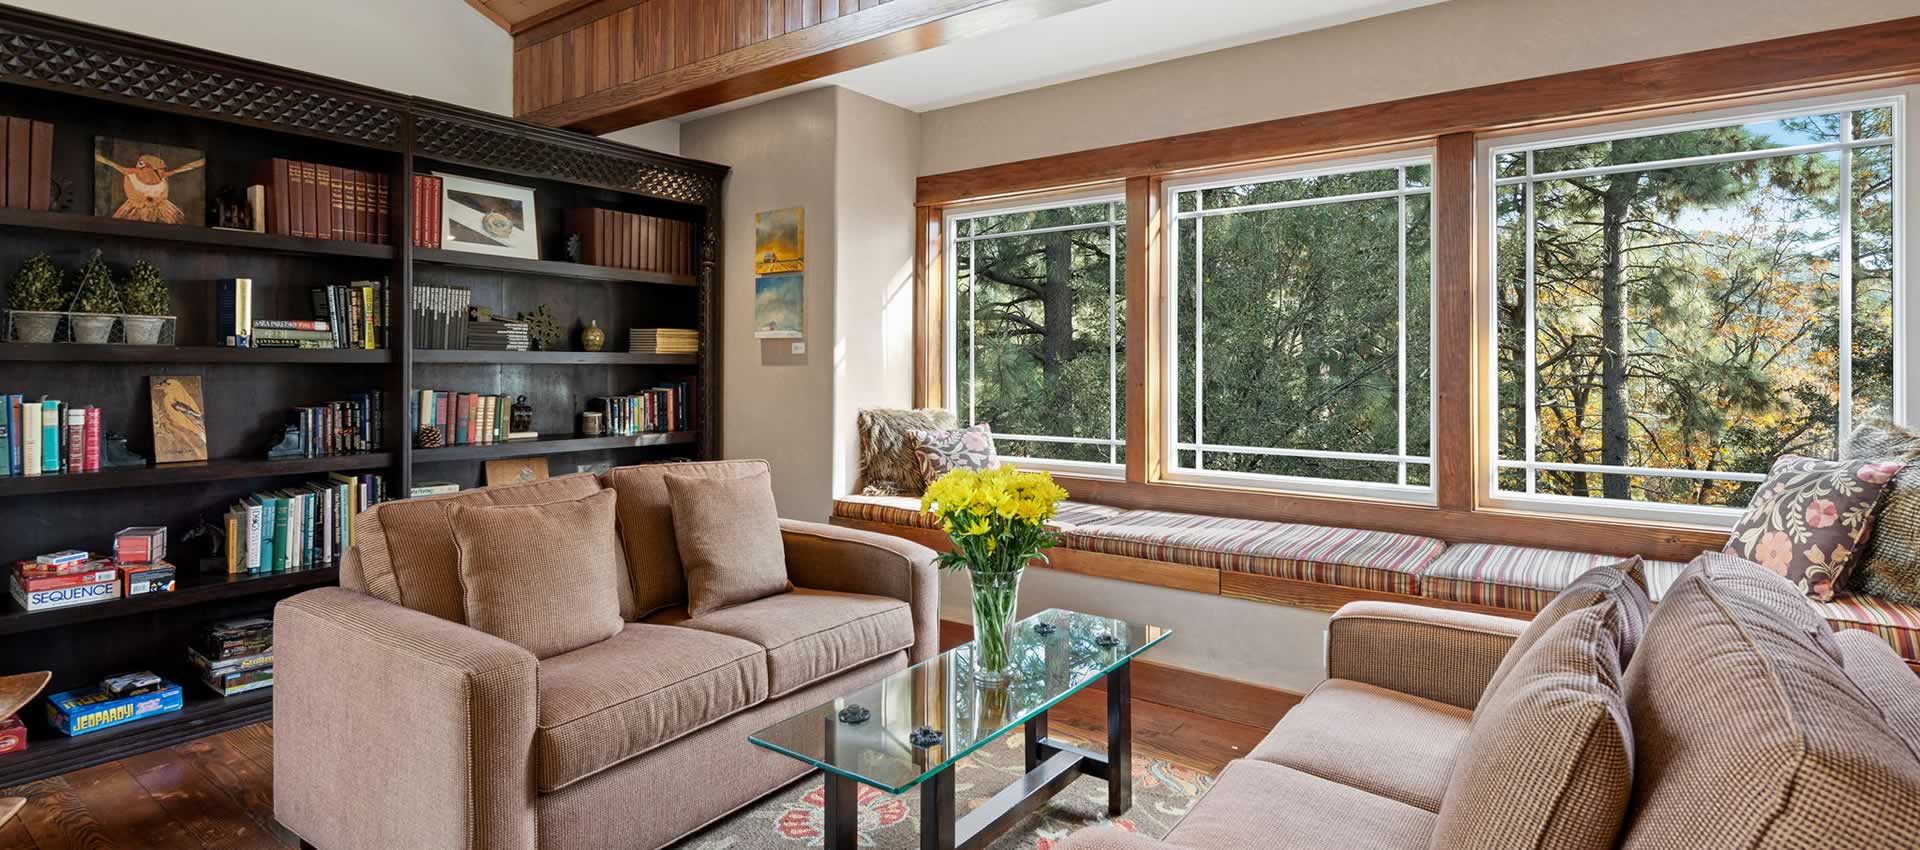 Grand Idyllwild Lodge Library bookcase and sofas with forest view